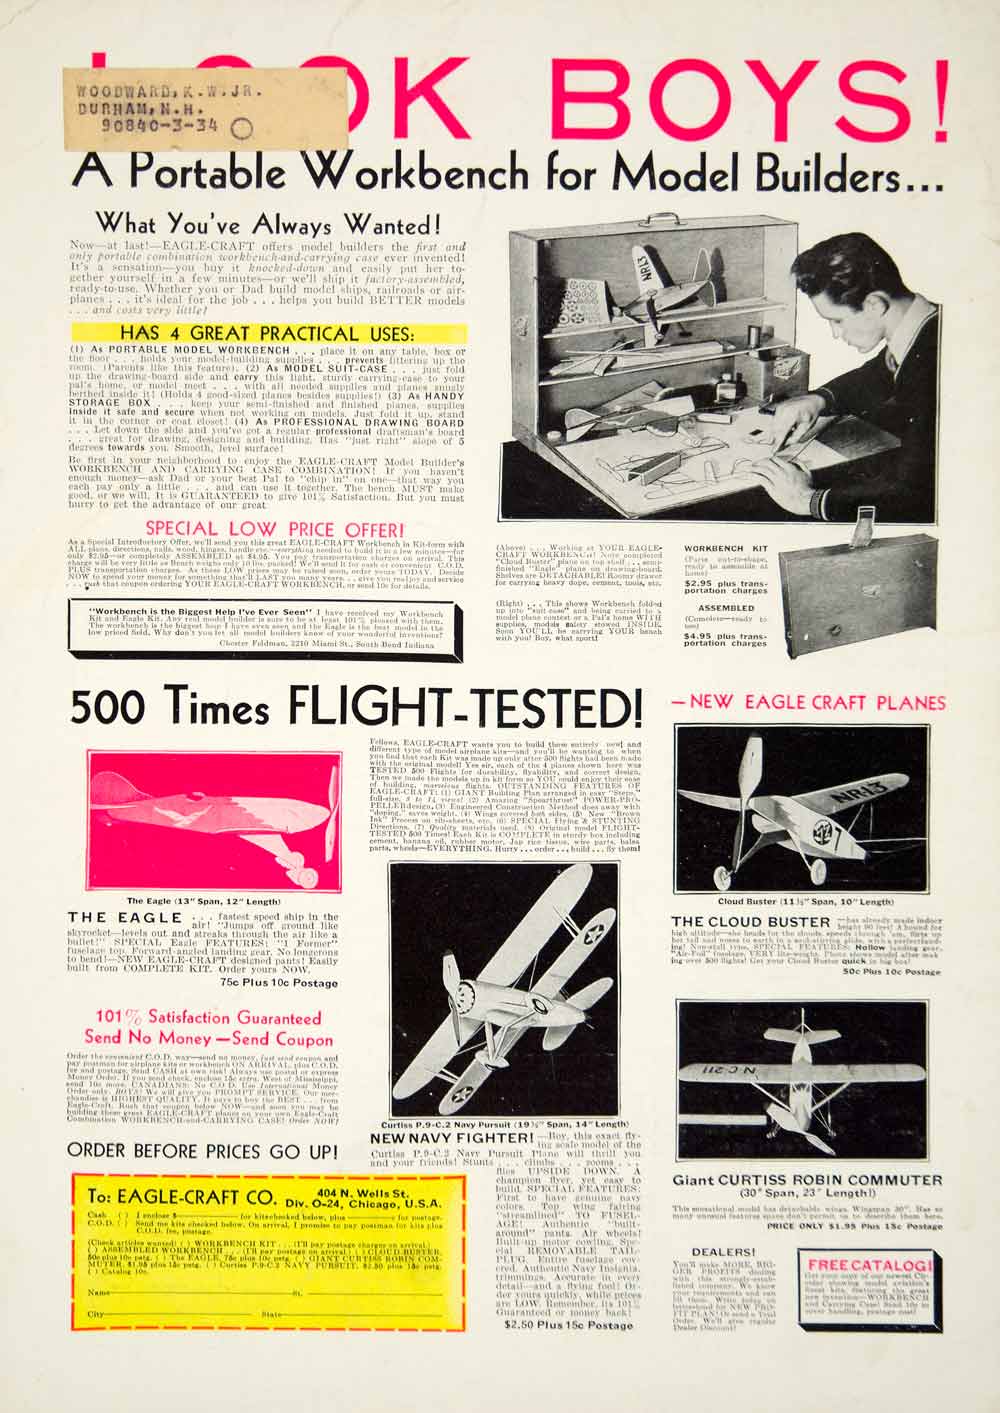 1934 Ad Portable Workbench Eagle Craft Airplanes Curtiss Robin Commuter YOR2